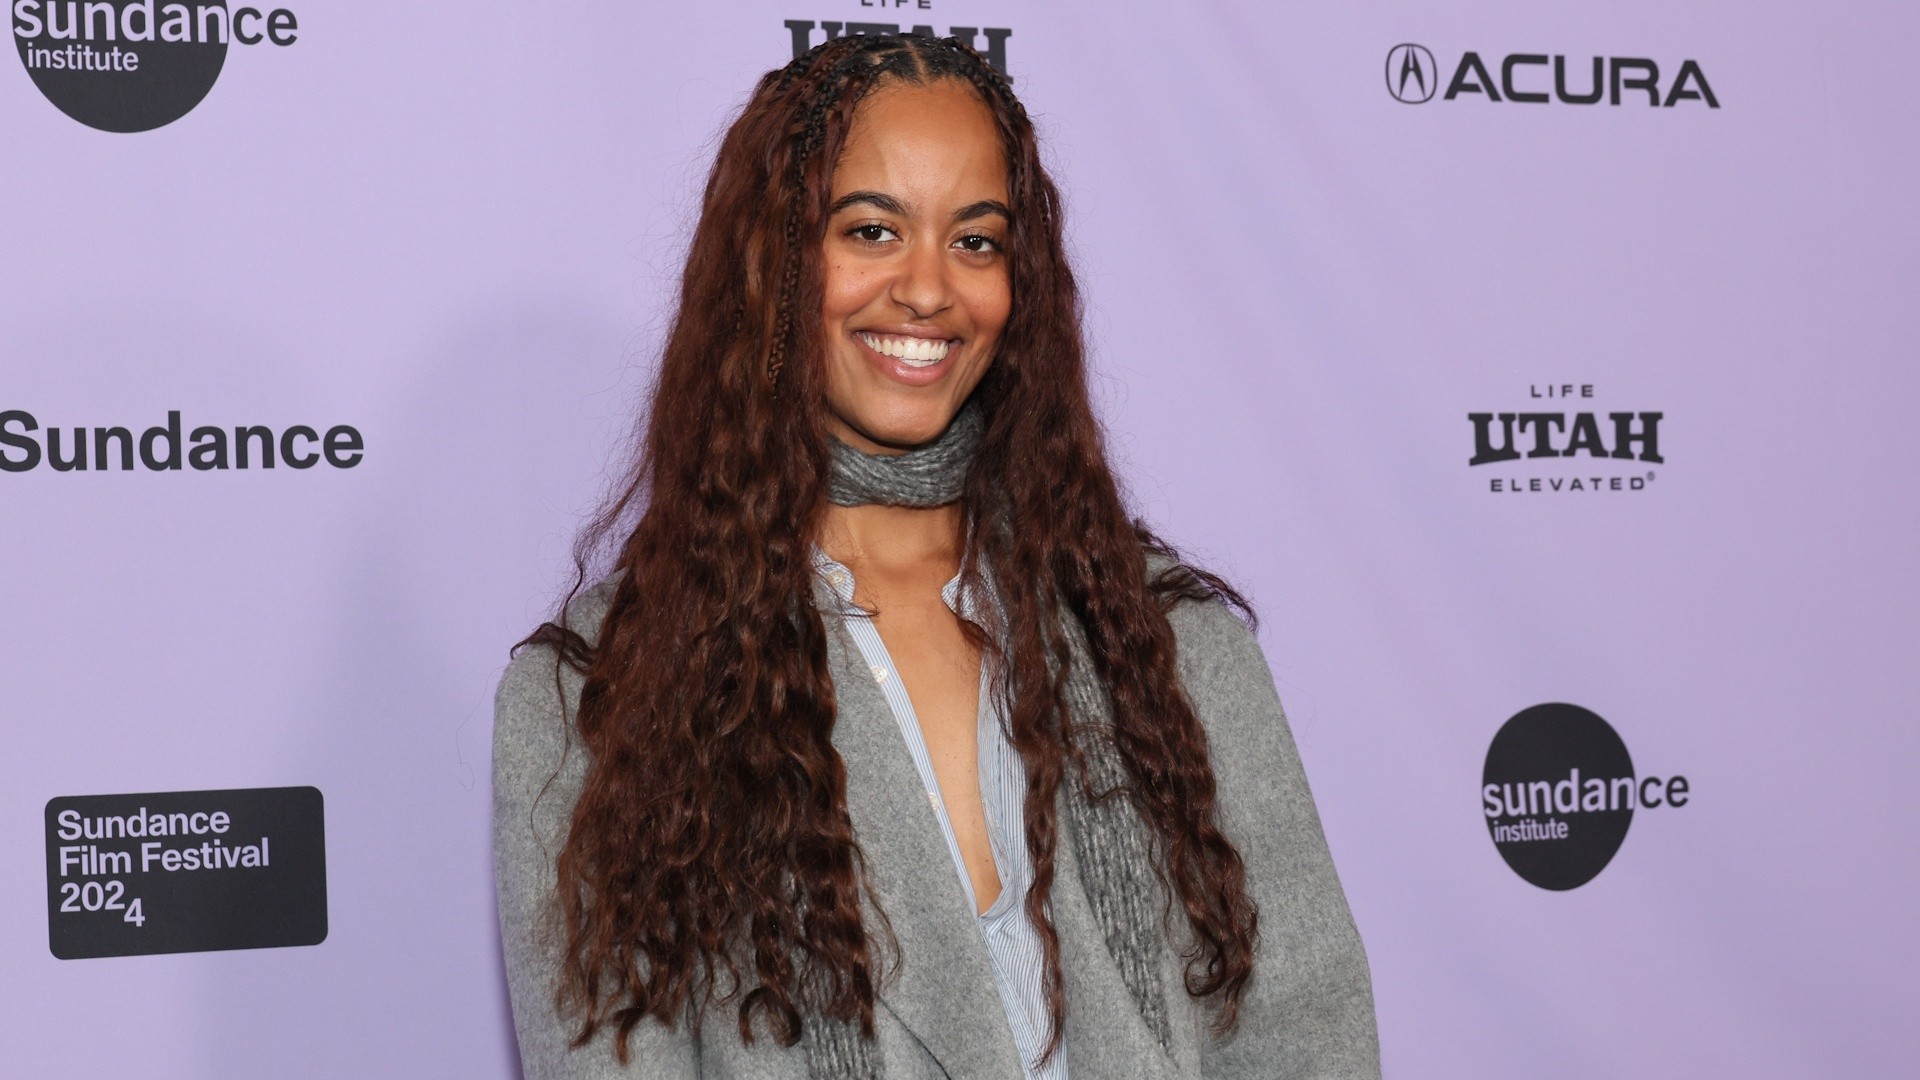 Malia Obama makes red carpet debut at Sundance screening for her short film  – NBC Connecticut